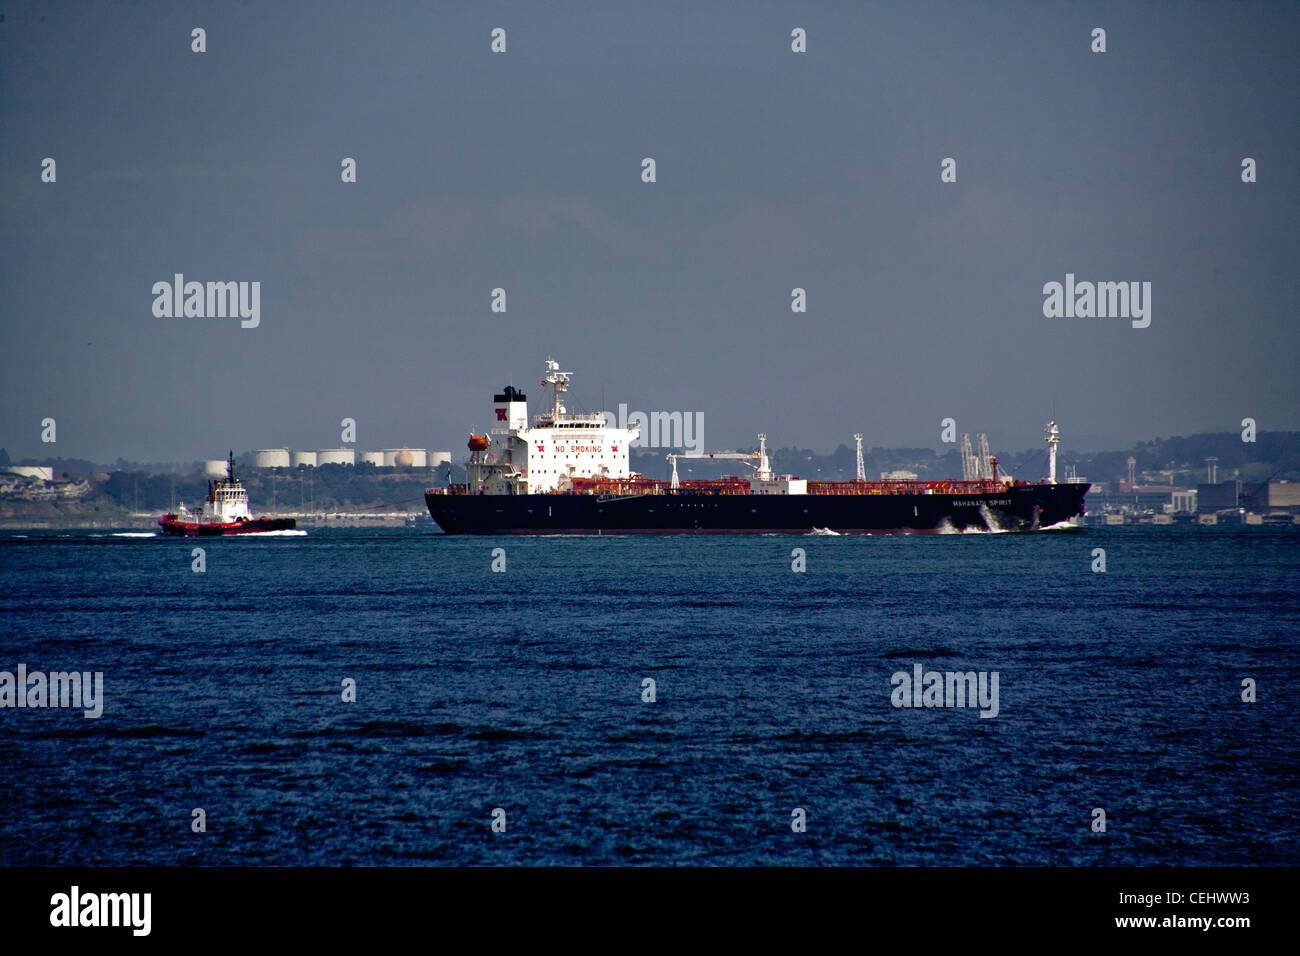 Accompanied by a tugboat, an ocean going oil tanker crosses San Francisco Bay. Note large 'No Smoking' sign on ship. Stock Photo